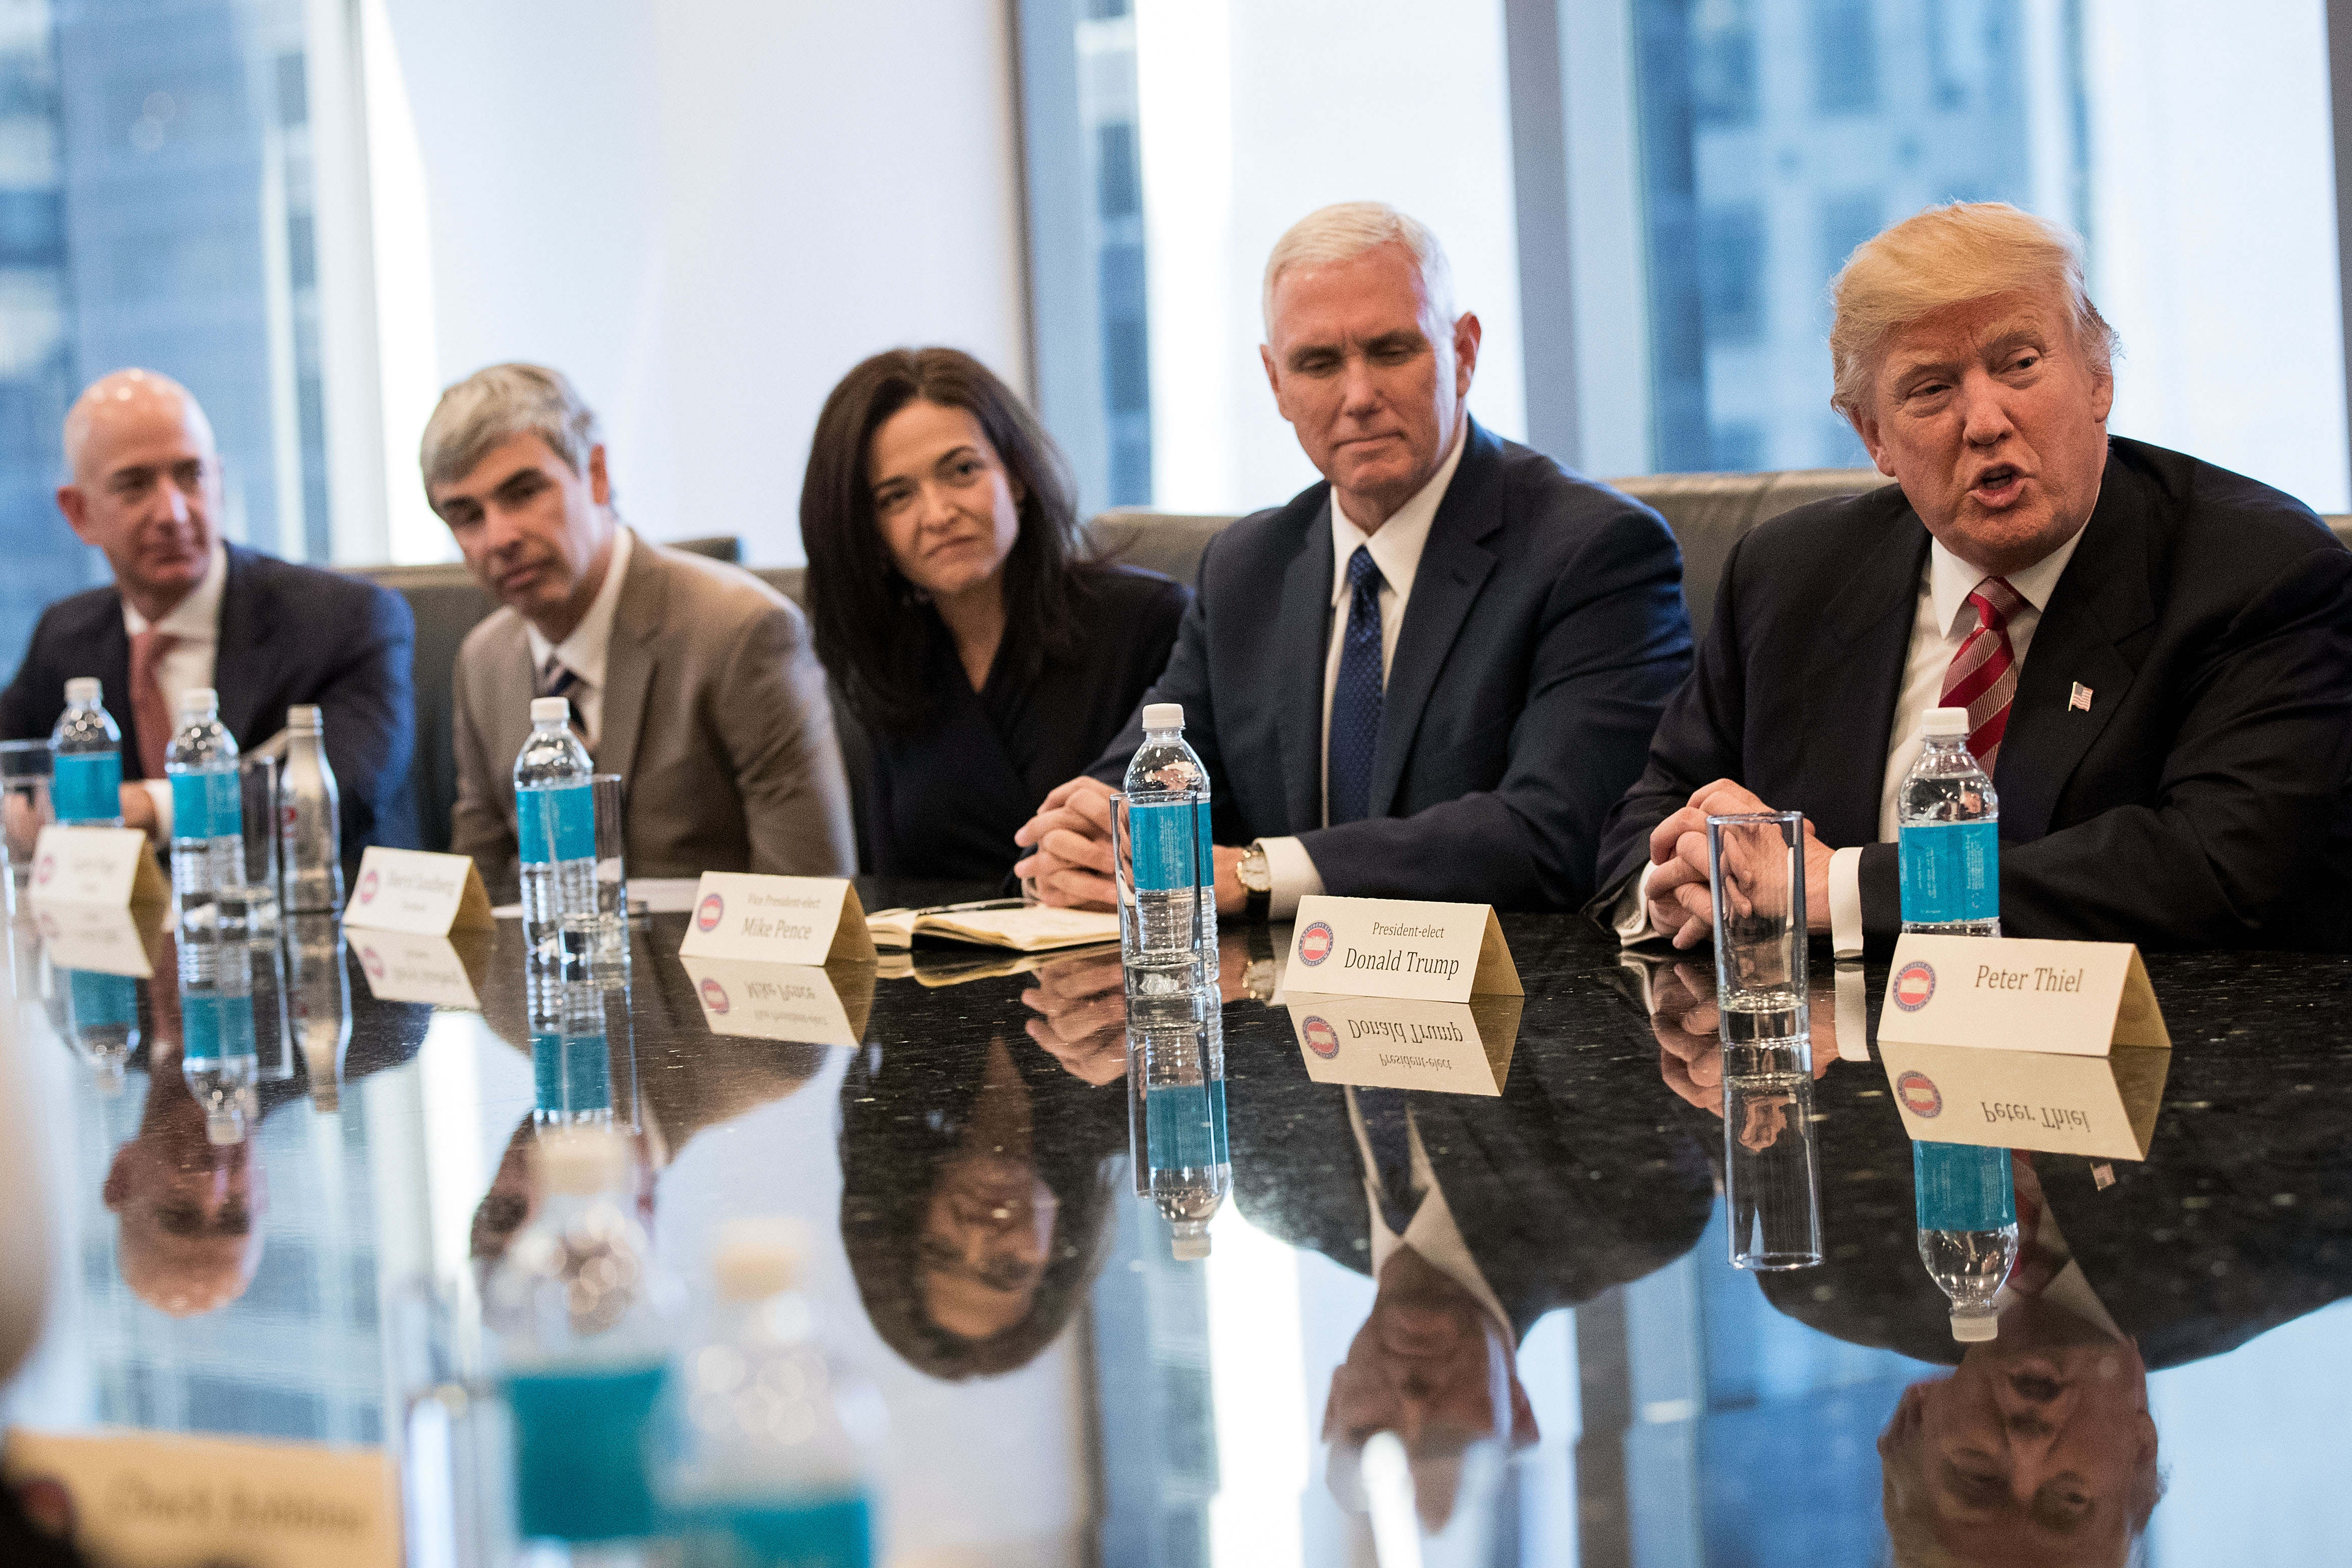 Amazon CEO Jeff Bezos, Google’s Larry Page, Facebook CFO Sheryl Sandberg, VP Mike Pence and President Donald Trump sitting at a table